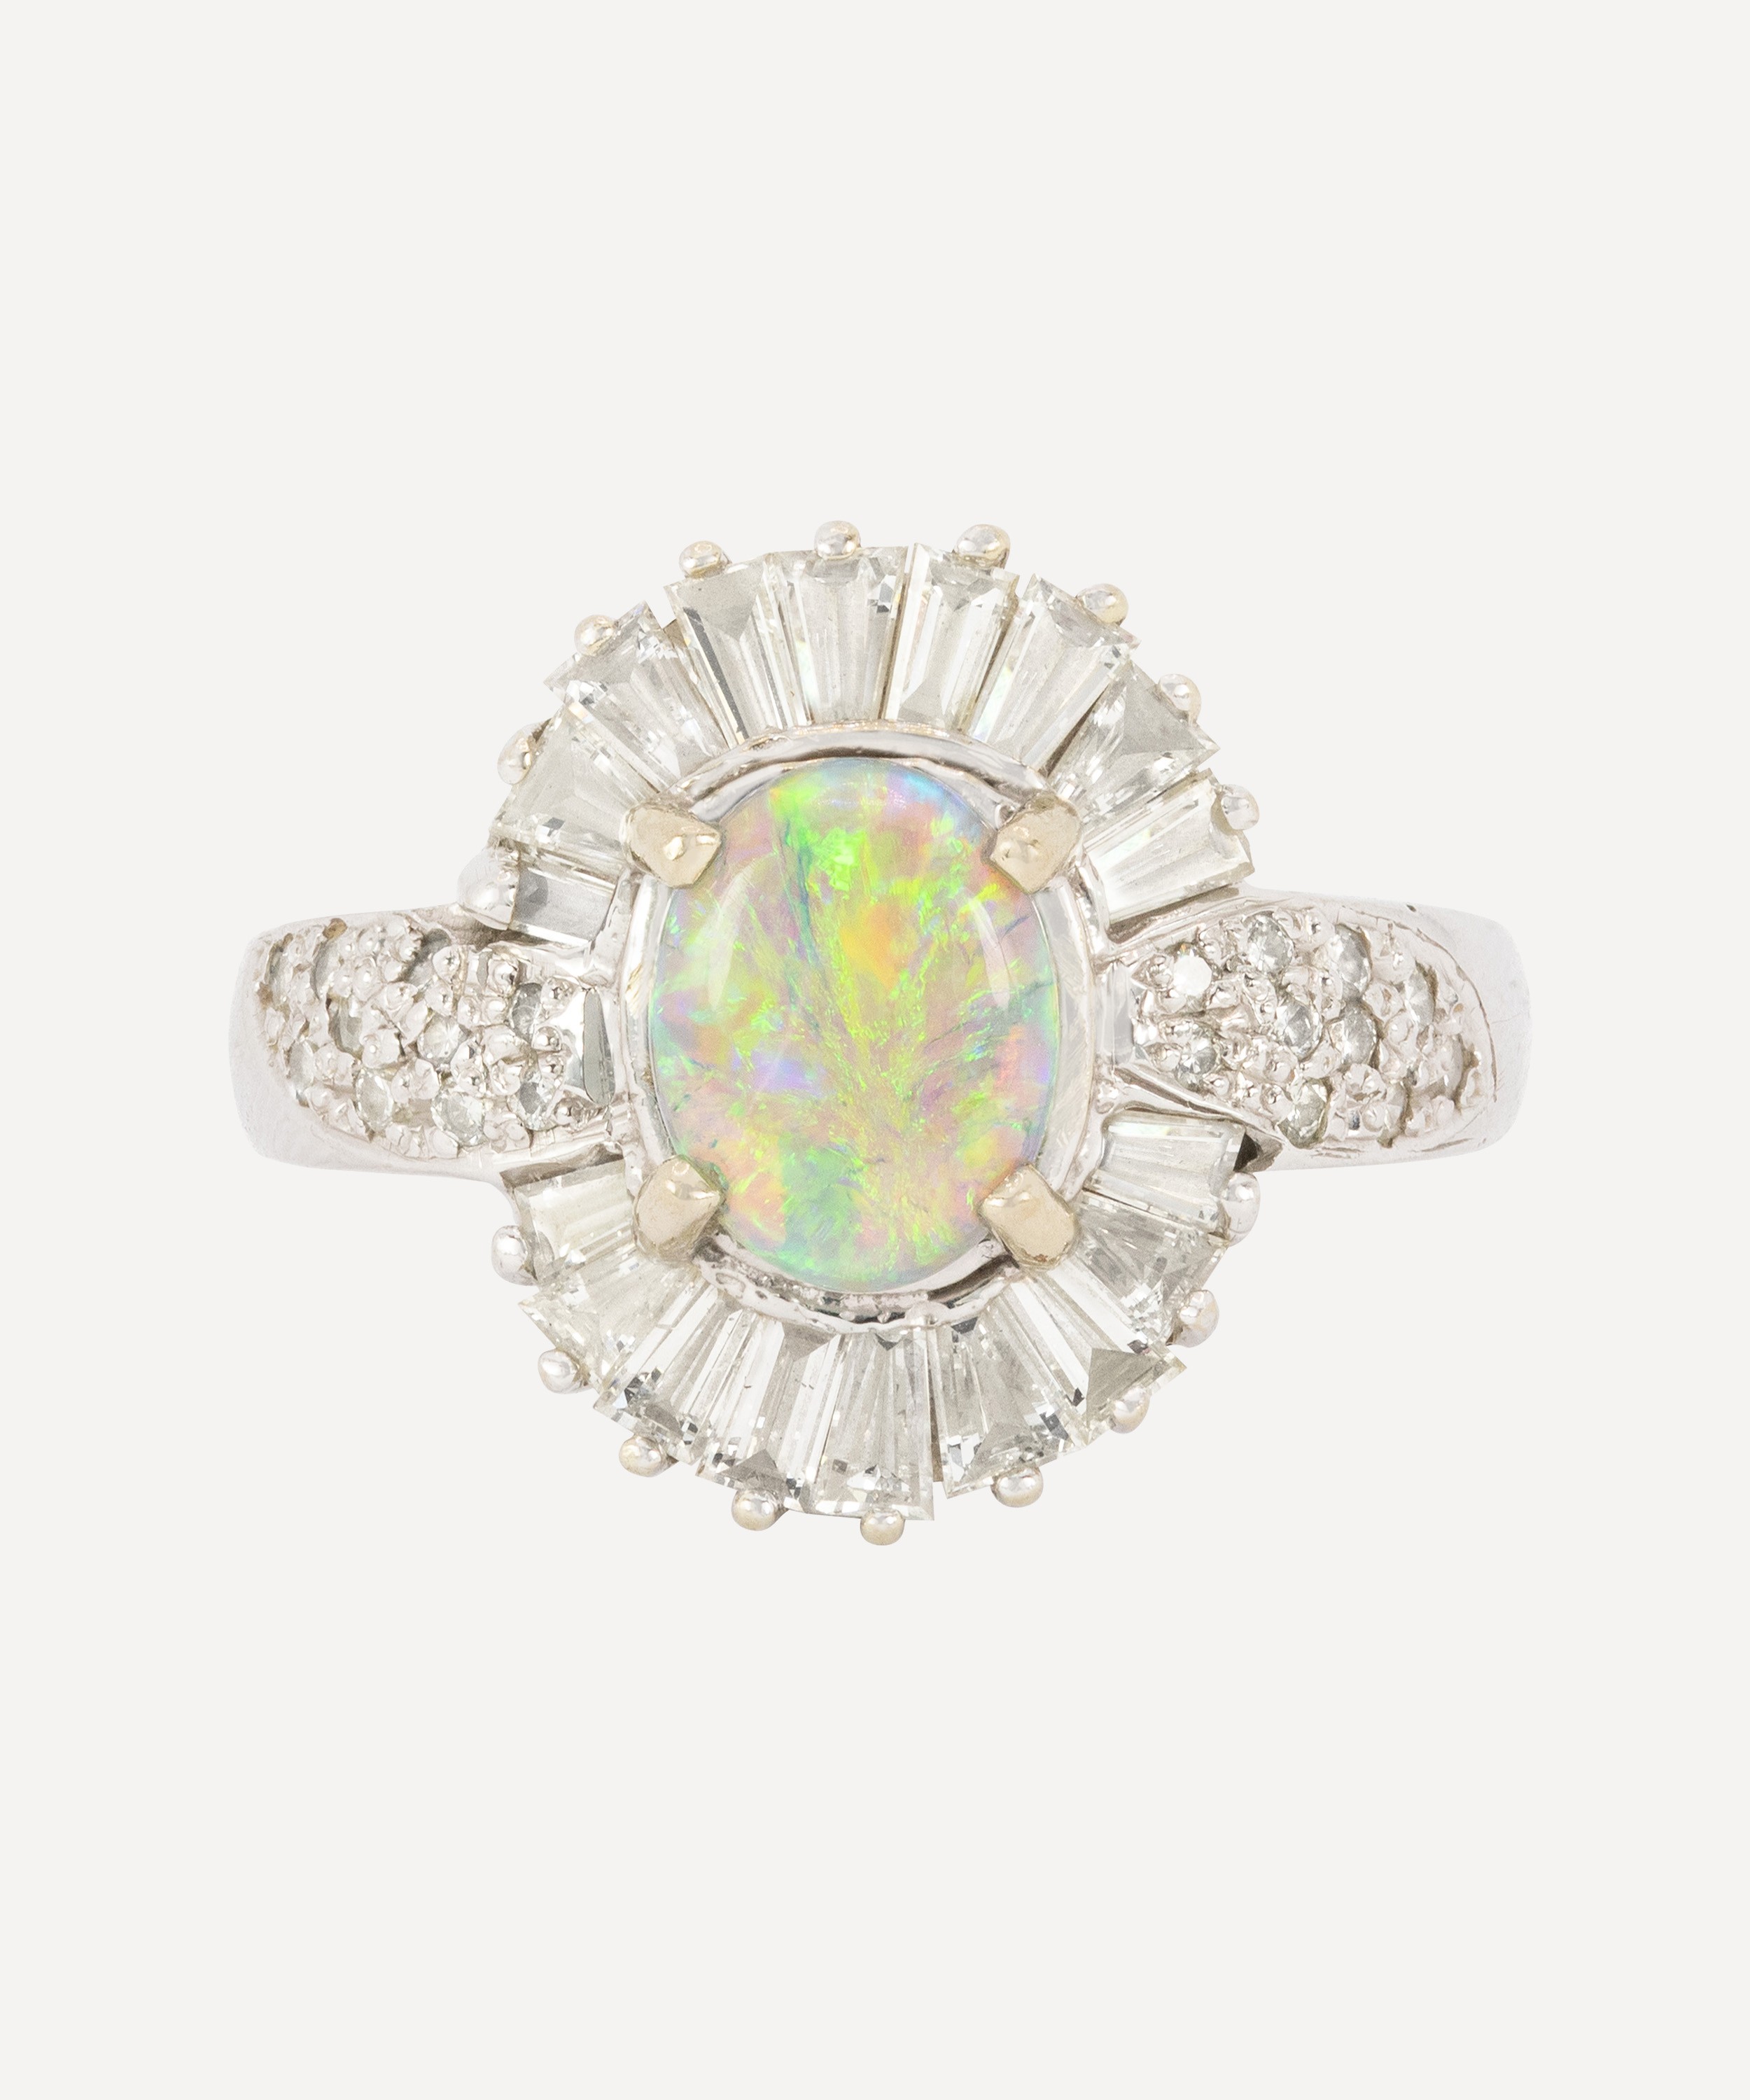 Kojis - 14ct White Gold Vintage Opal and Diamond Cluster Ring